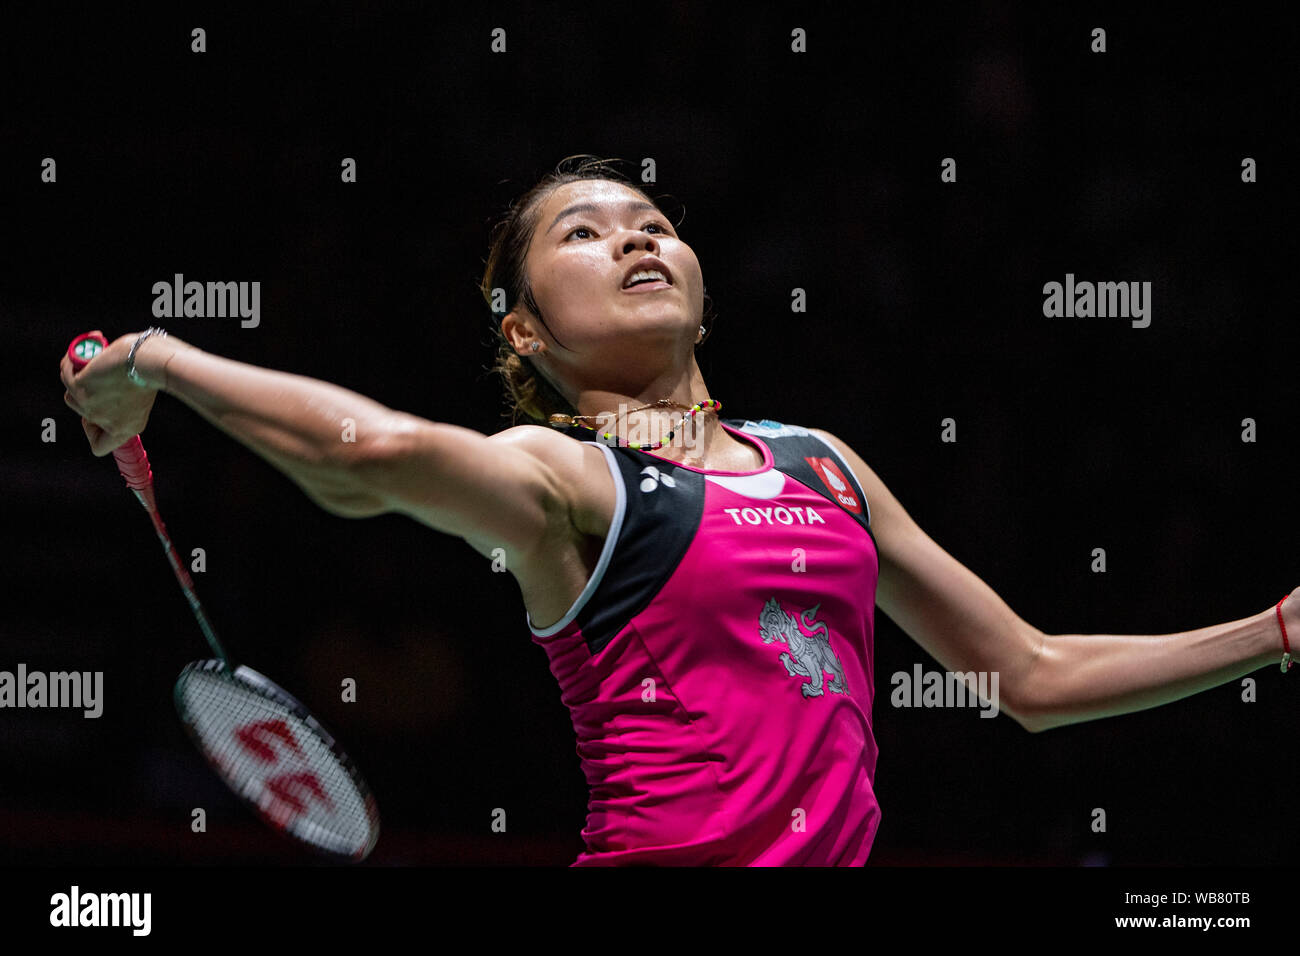 Basel, Switzerland. 24th August, 2019. Ratchanok Intanon of Thailand during  the BWF World Badminton Championships 2019, Women's Singles Semi Final at  the St. Jakobshalle in Basel, Switzerland, on August 24, 2019. (Photo